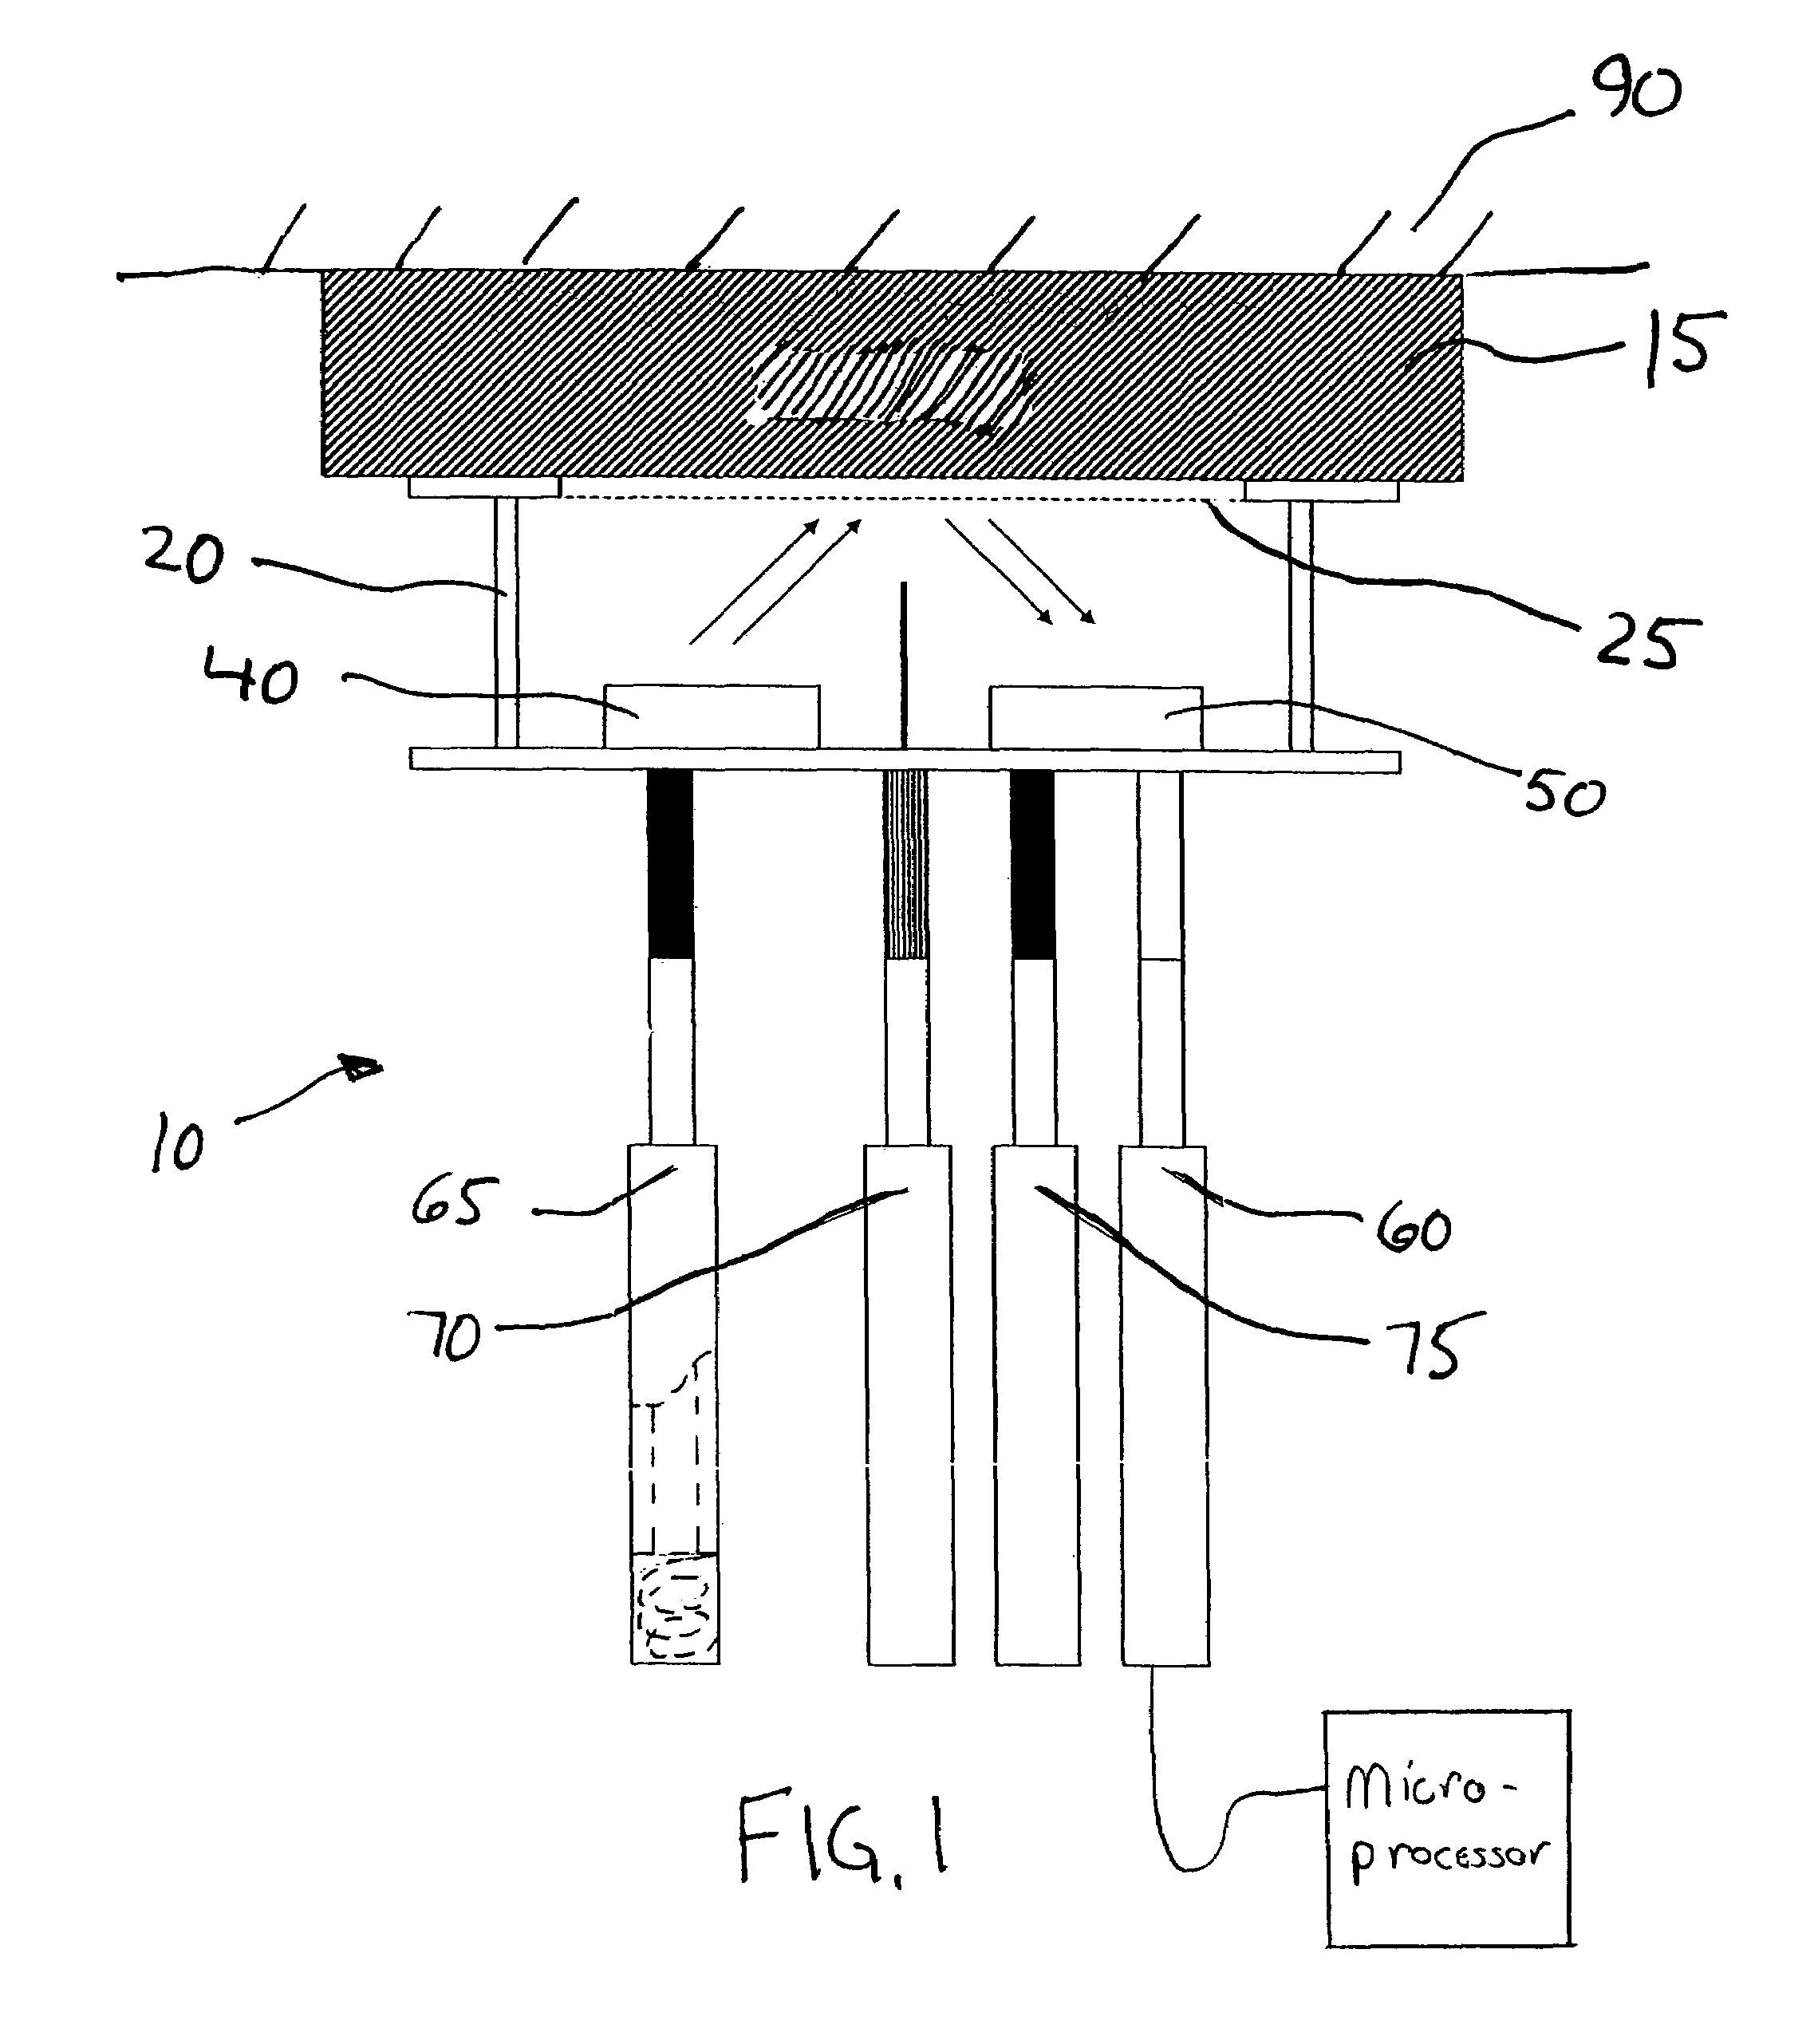 Method and apparatus for determining presence of a component in a printed circuit board